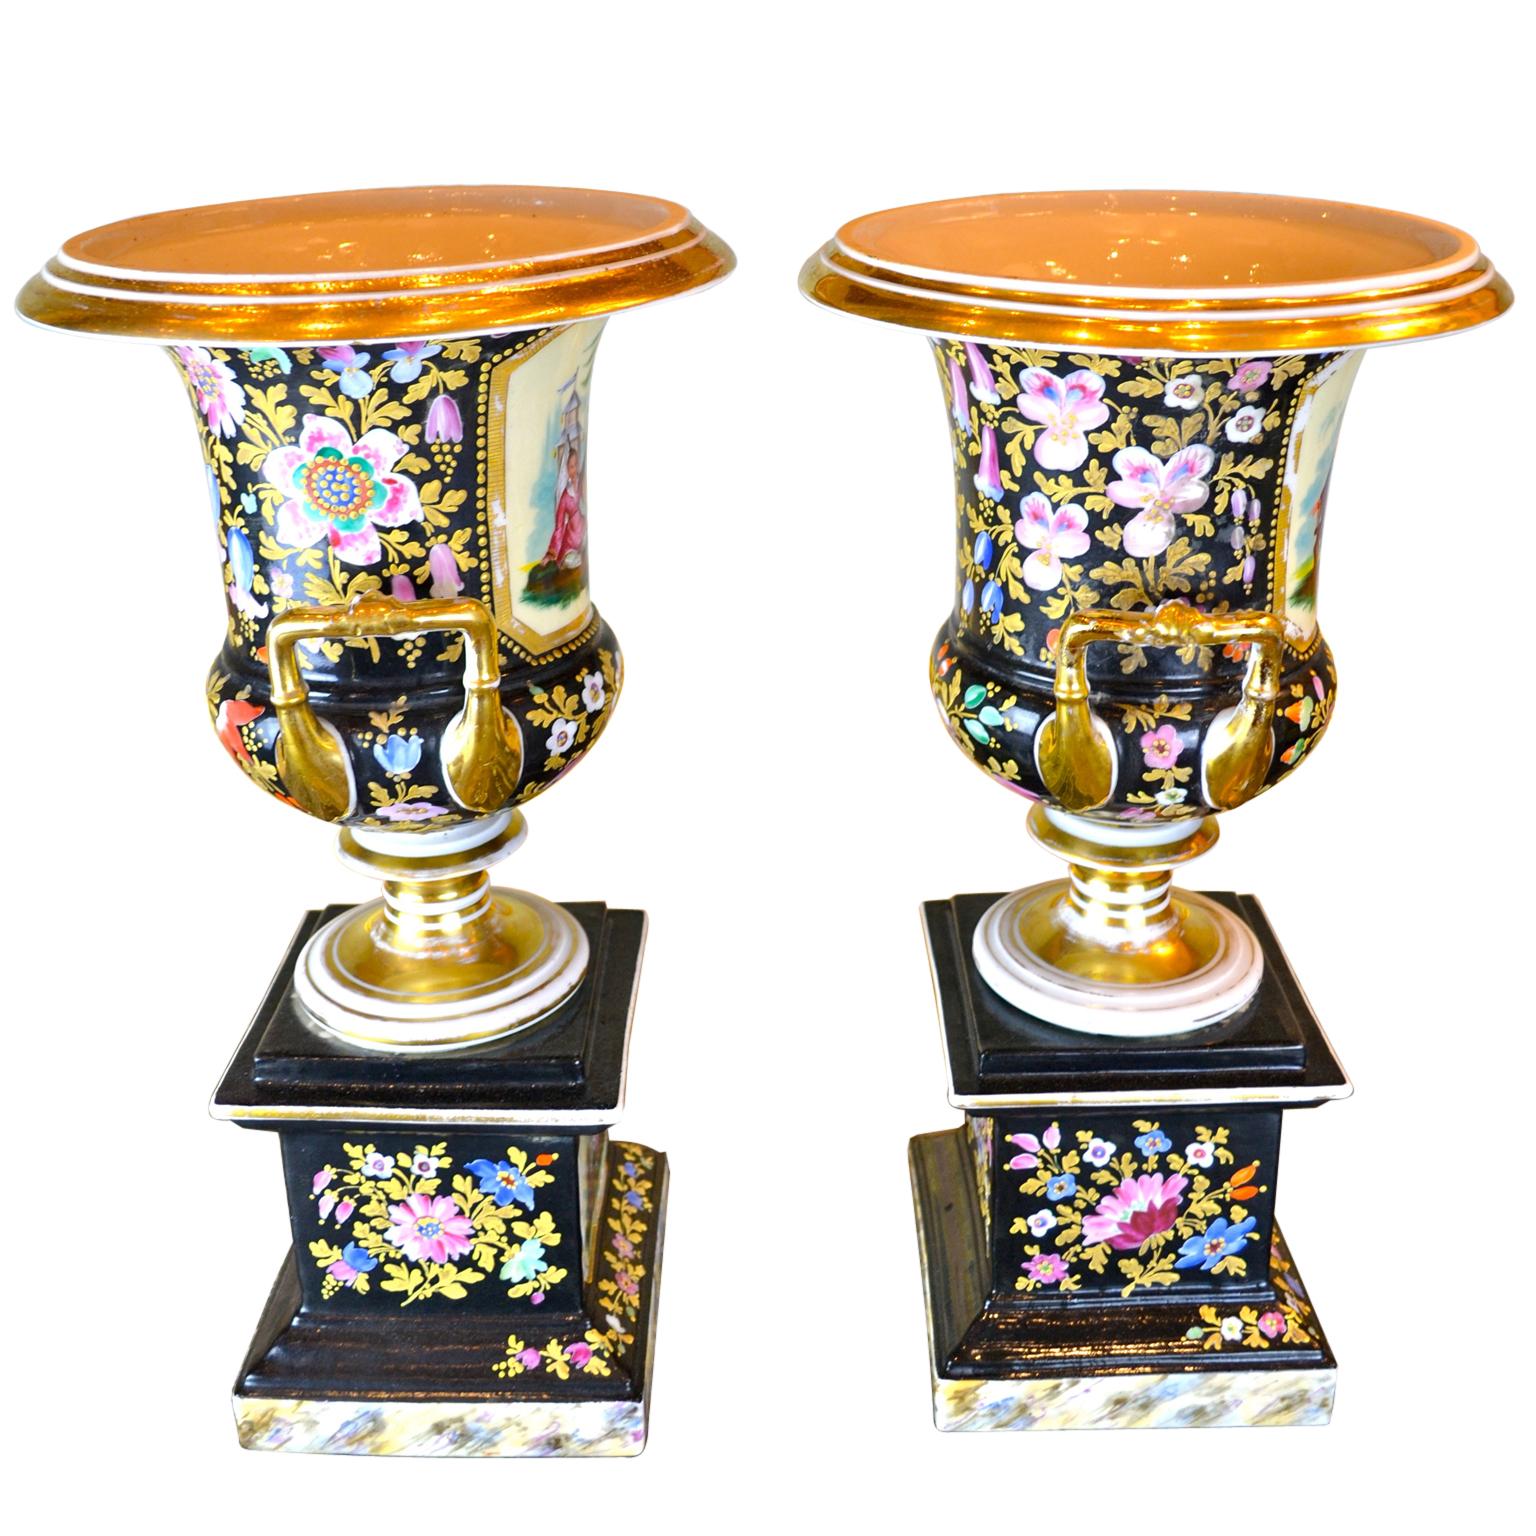 Pair of 19th Century French 